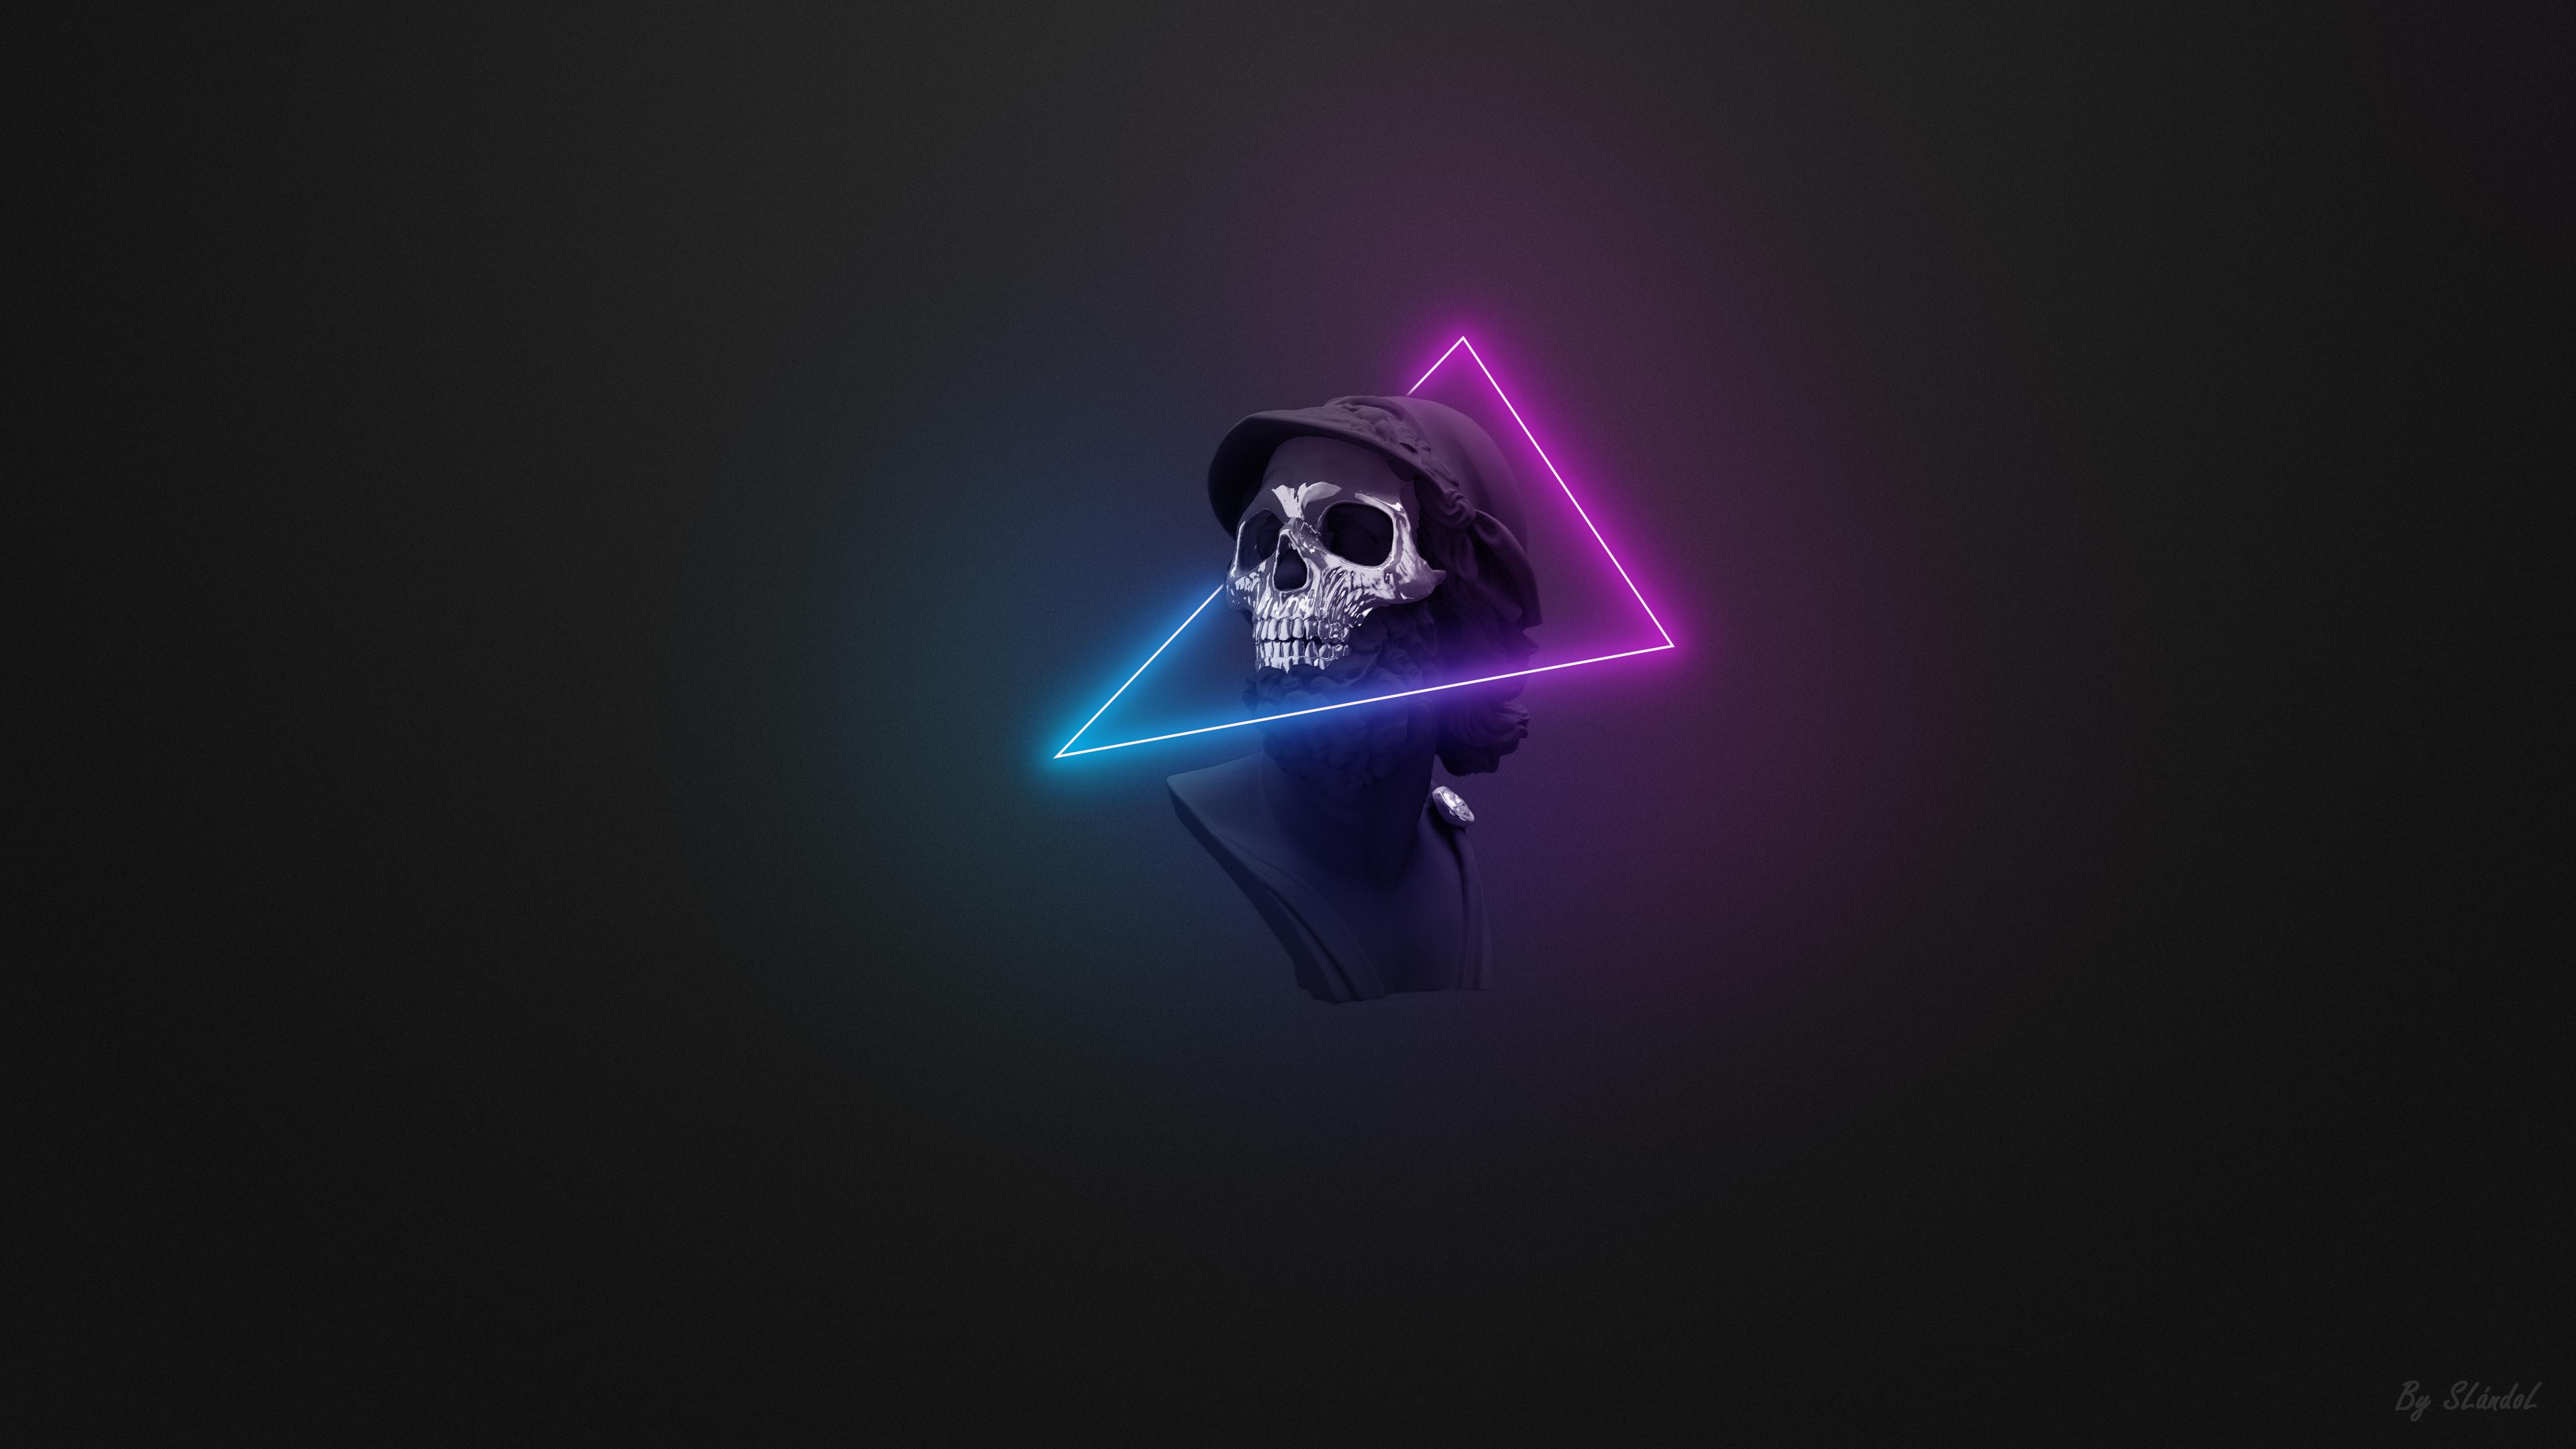 Skull 4K wallpaper for your desktop or mobile screen free and easy to download